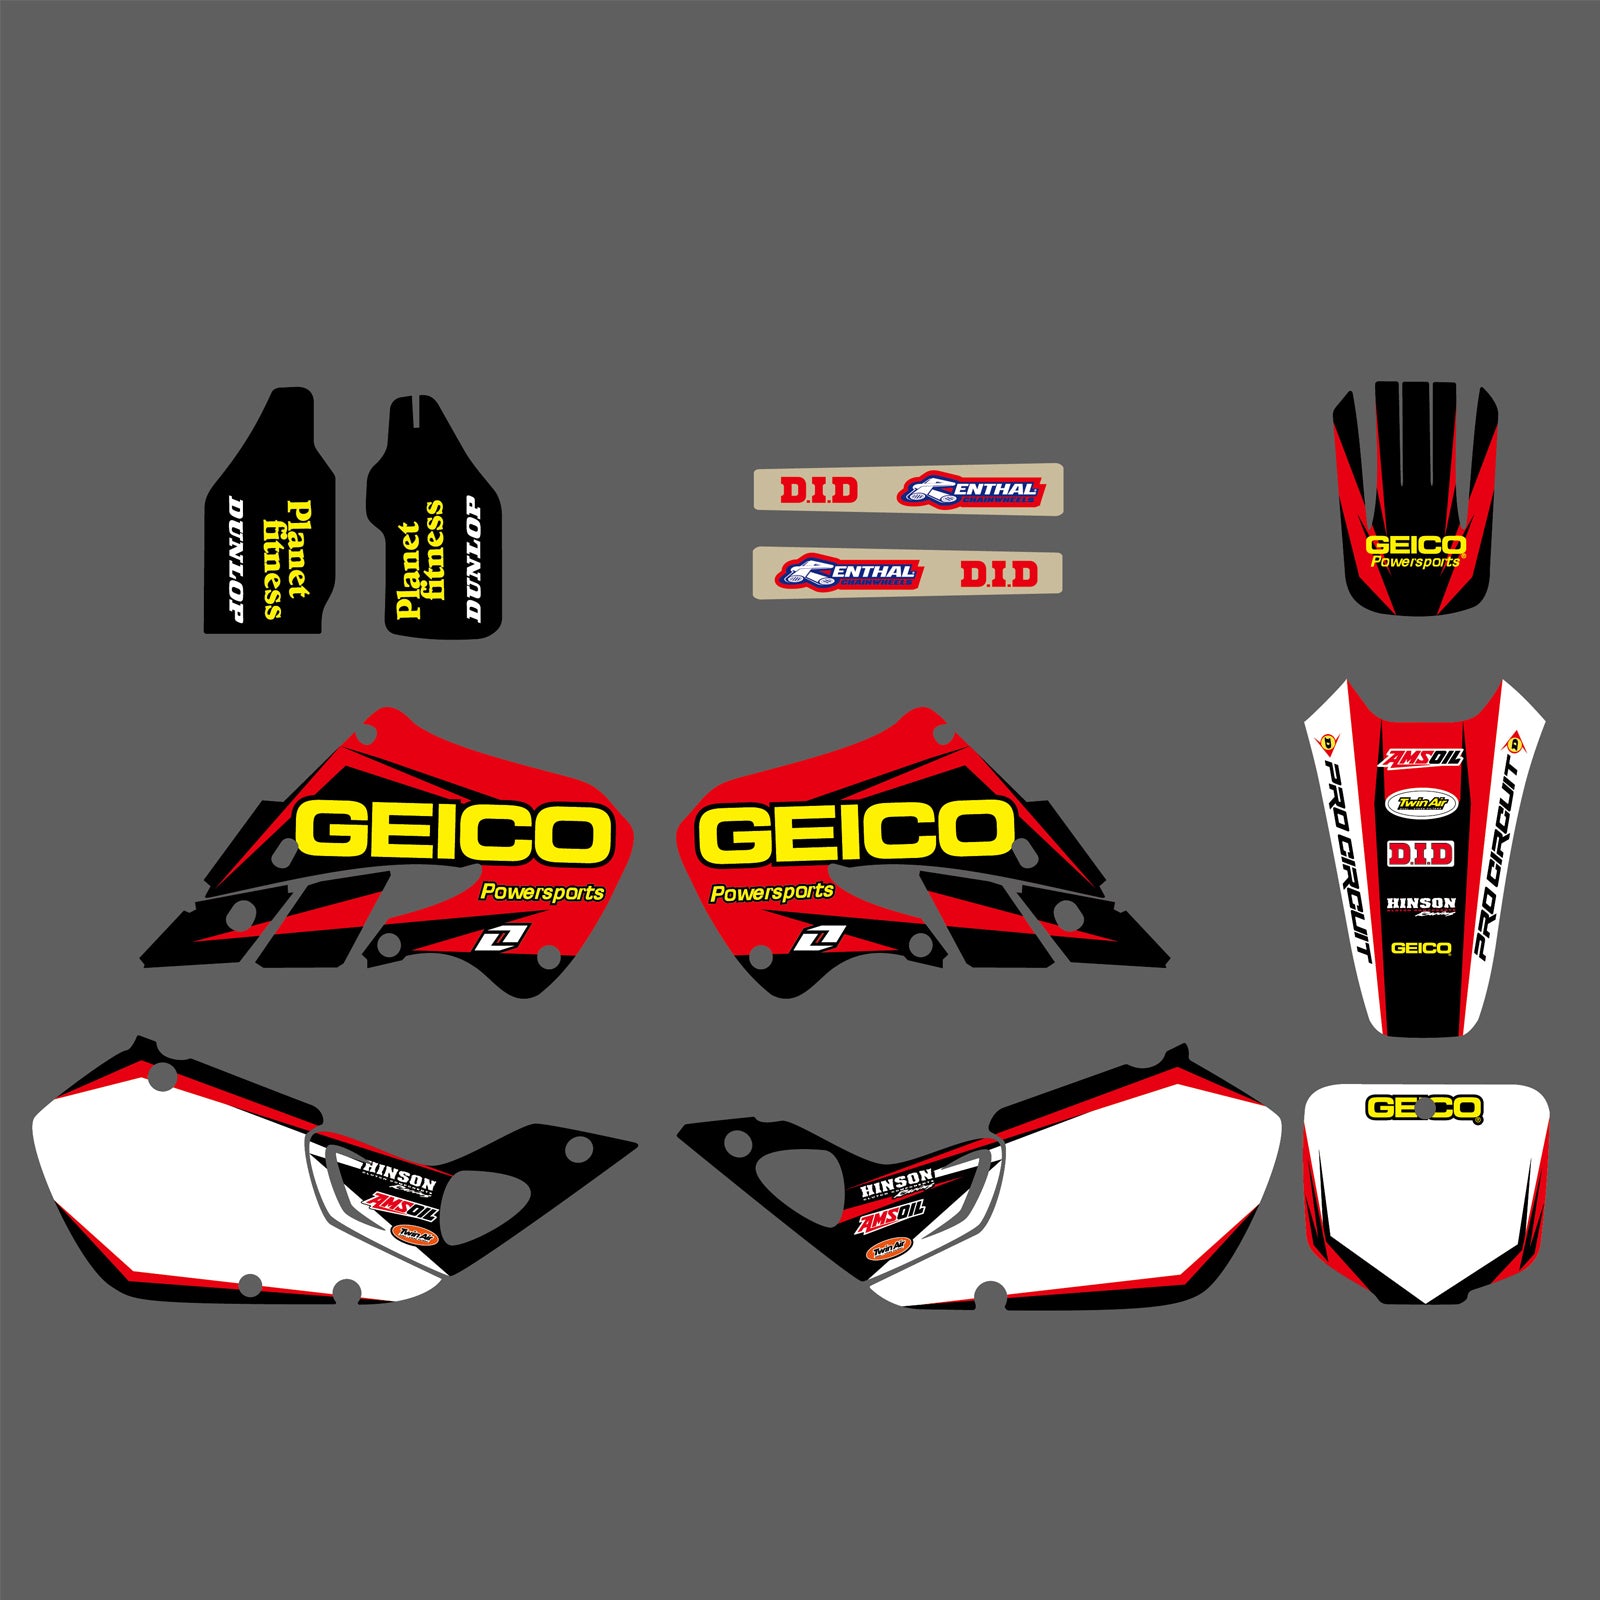 Team Decals Stickers Graphics Kit For HONDA CR125 98-99 CR250 97-99